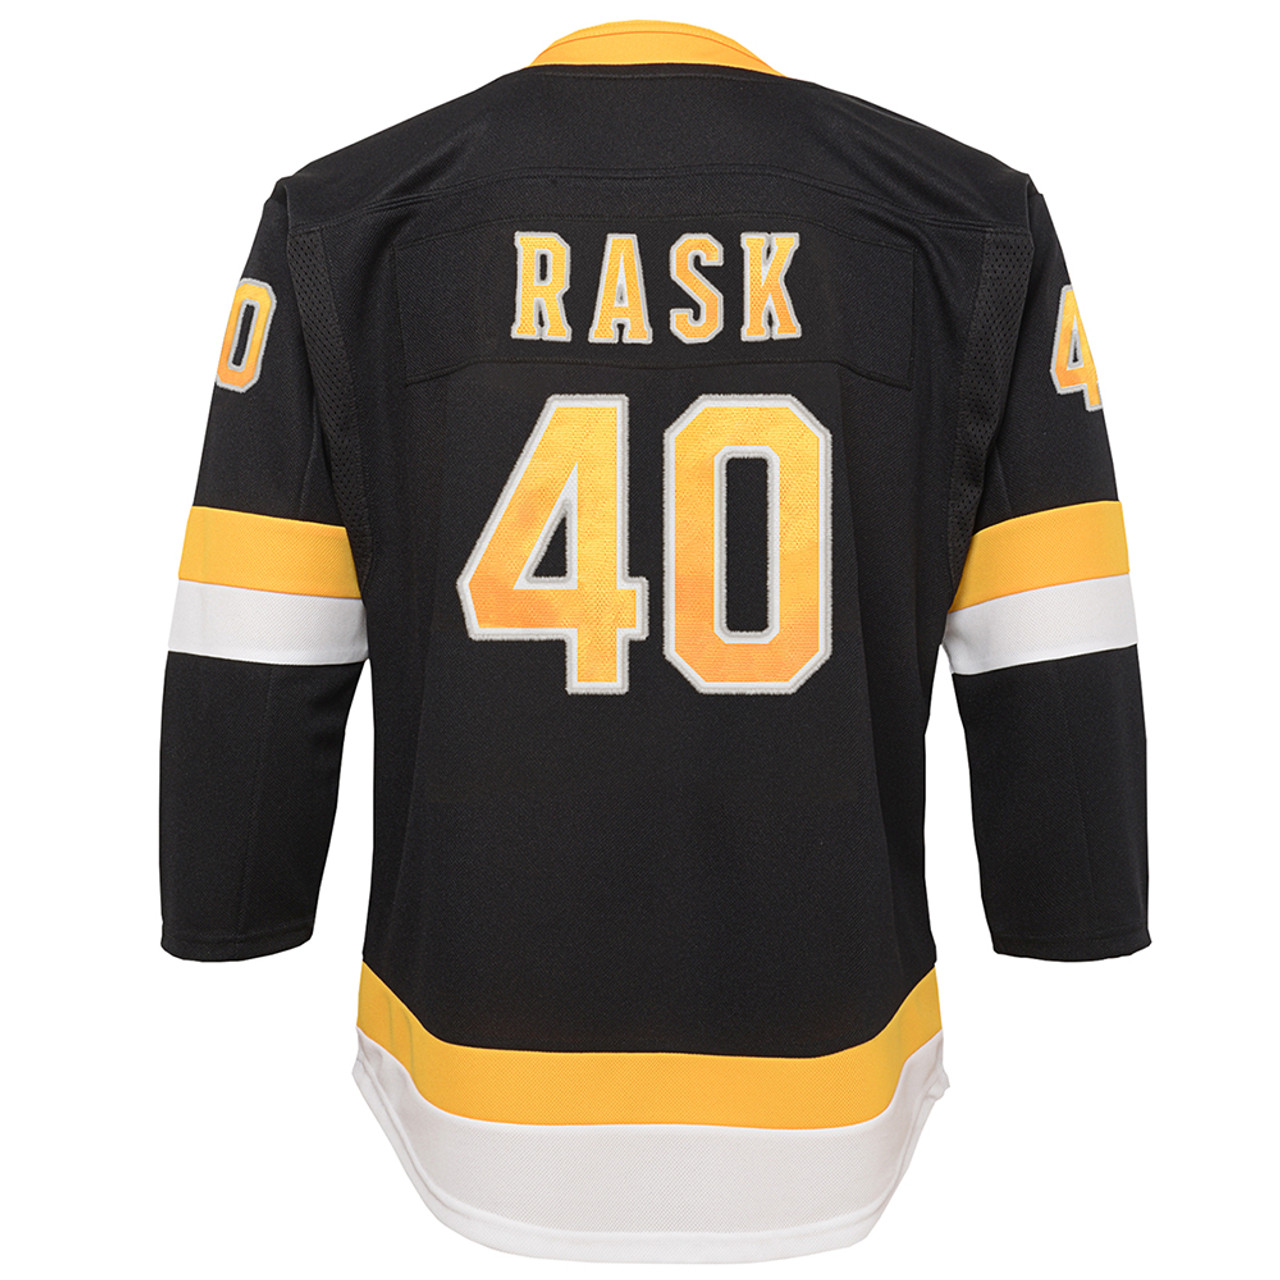 Rask Youth Premier Third Jersey 